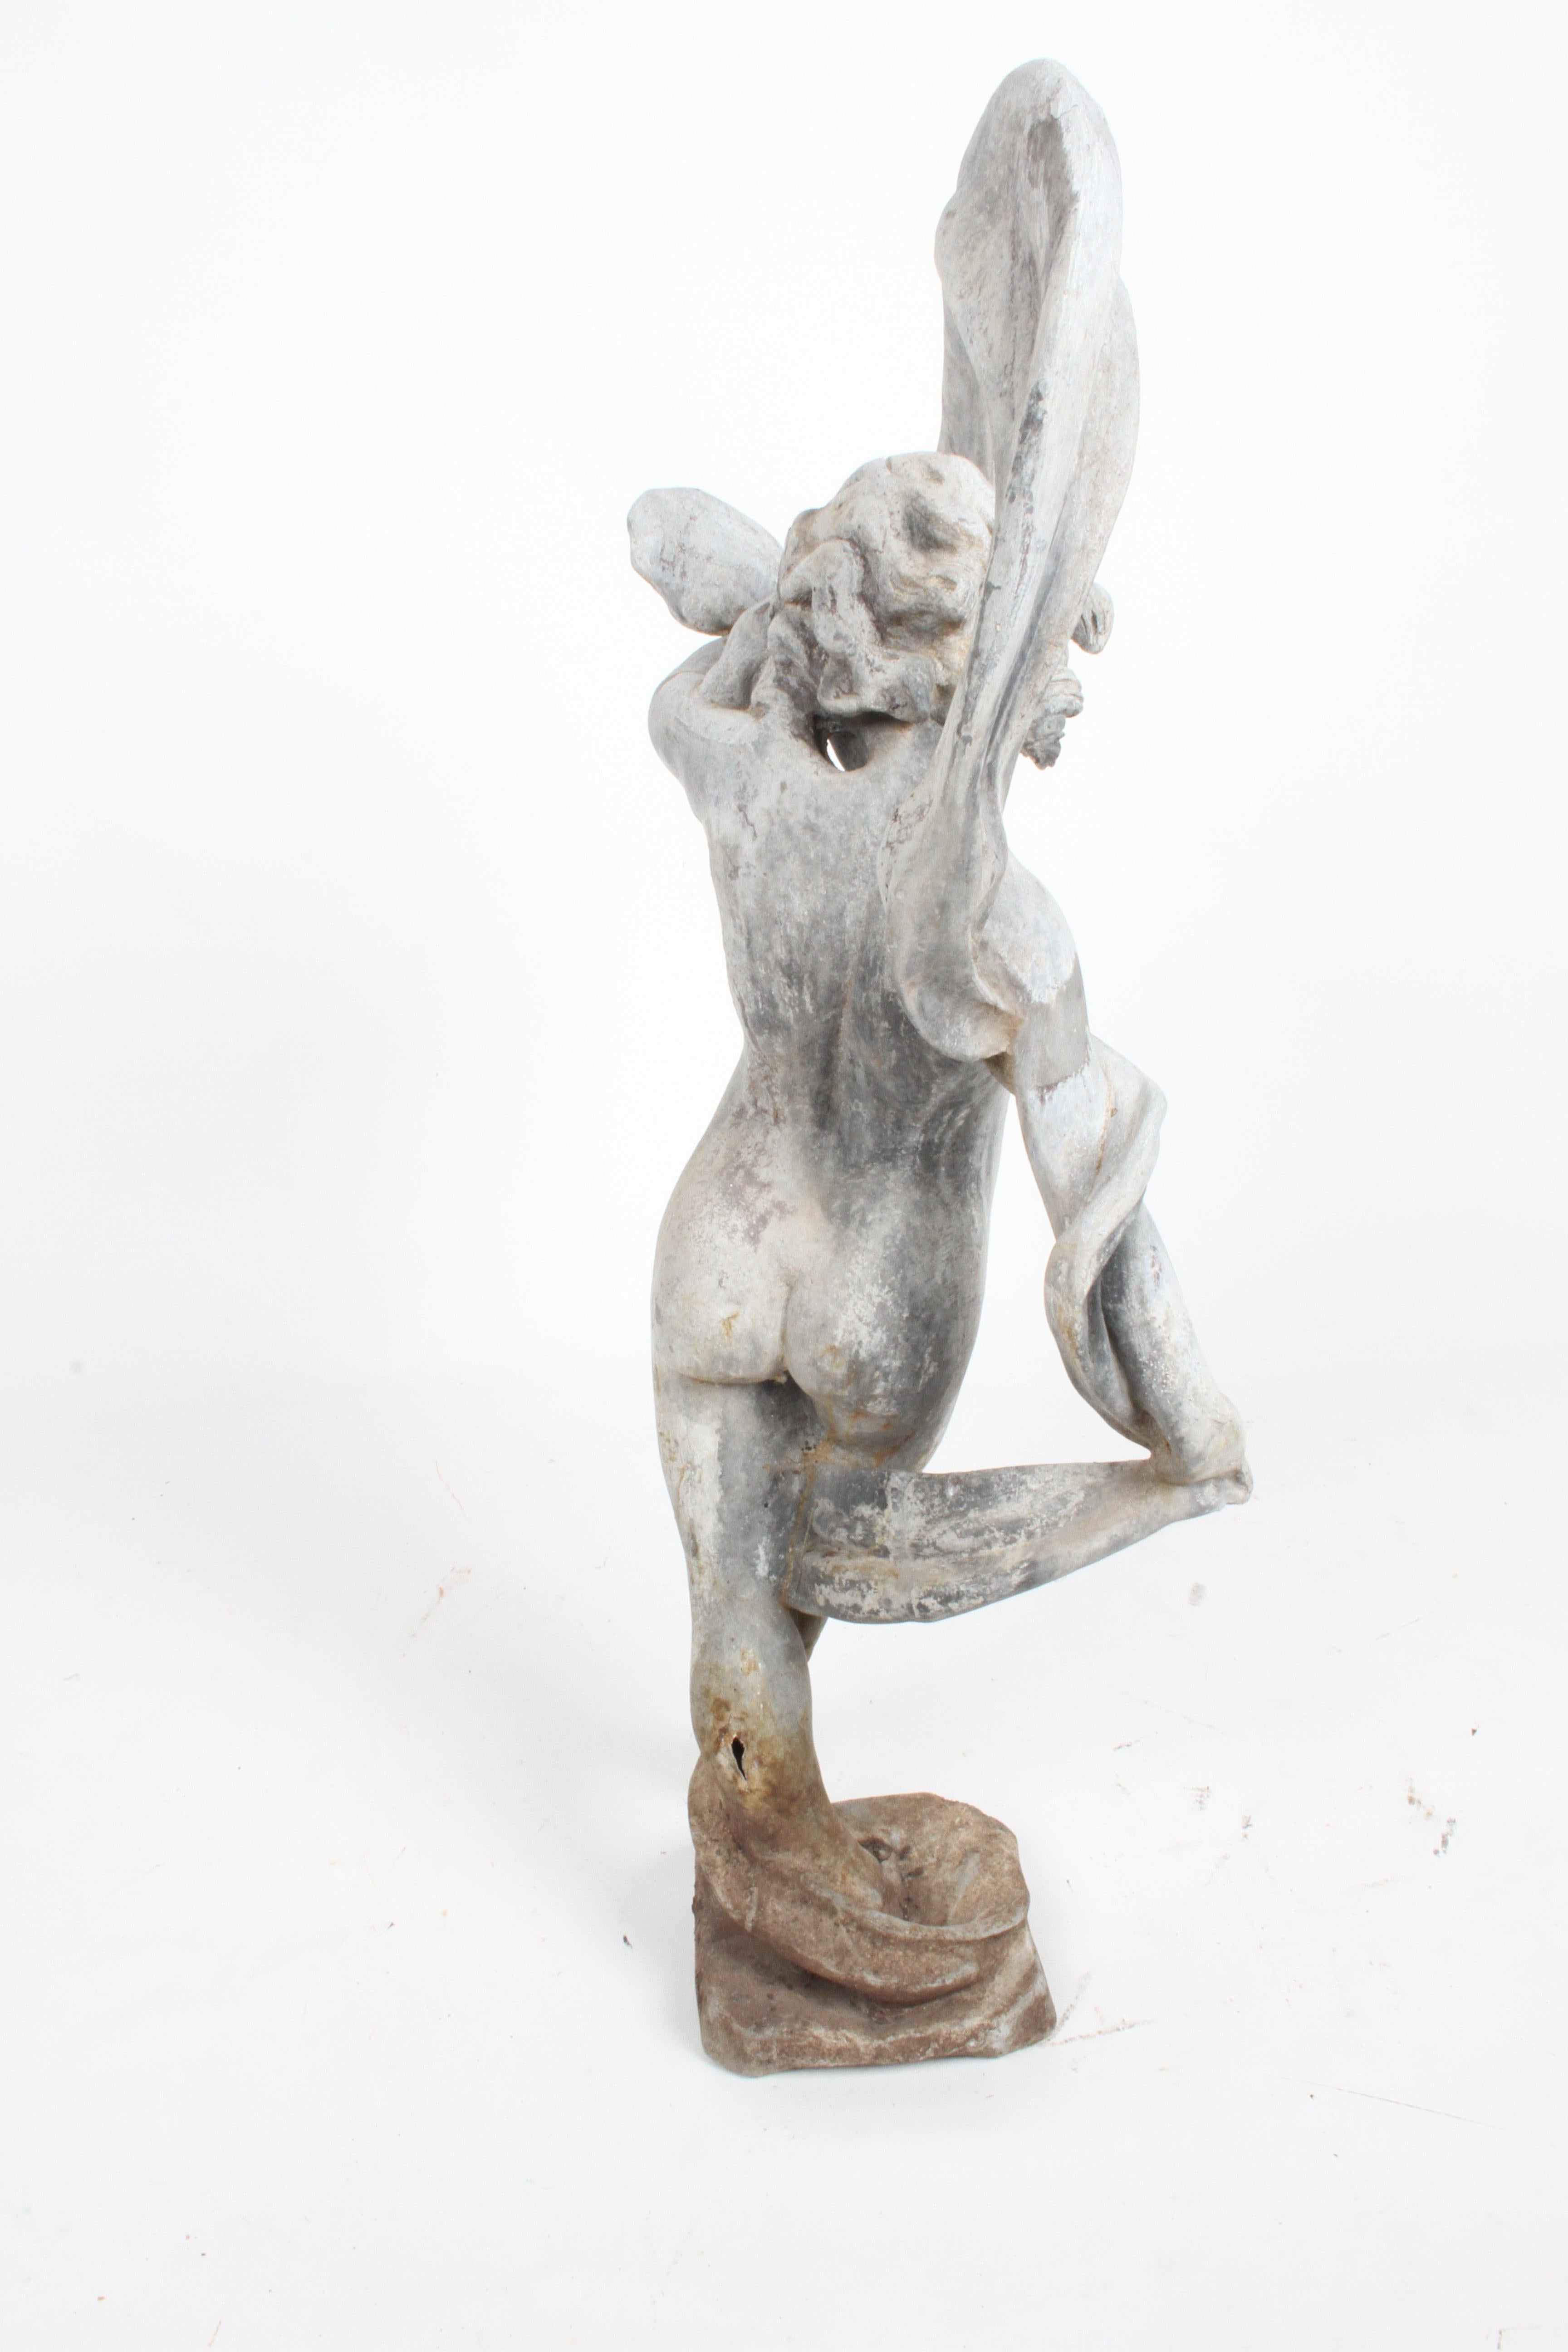 Antique Lead Garden Sculpture of a Dancing Putti or Cherub with Ribbon 2